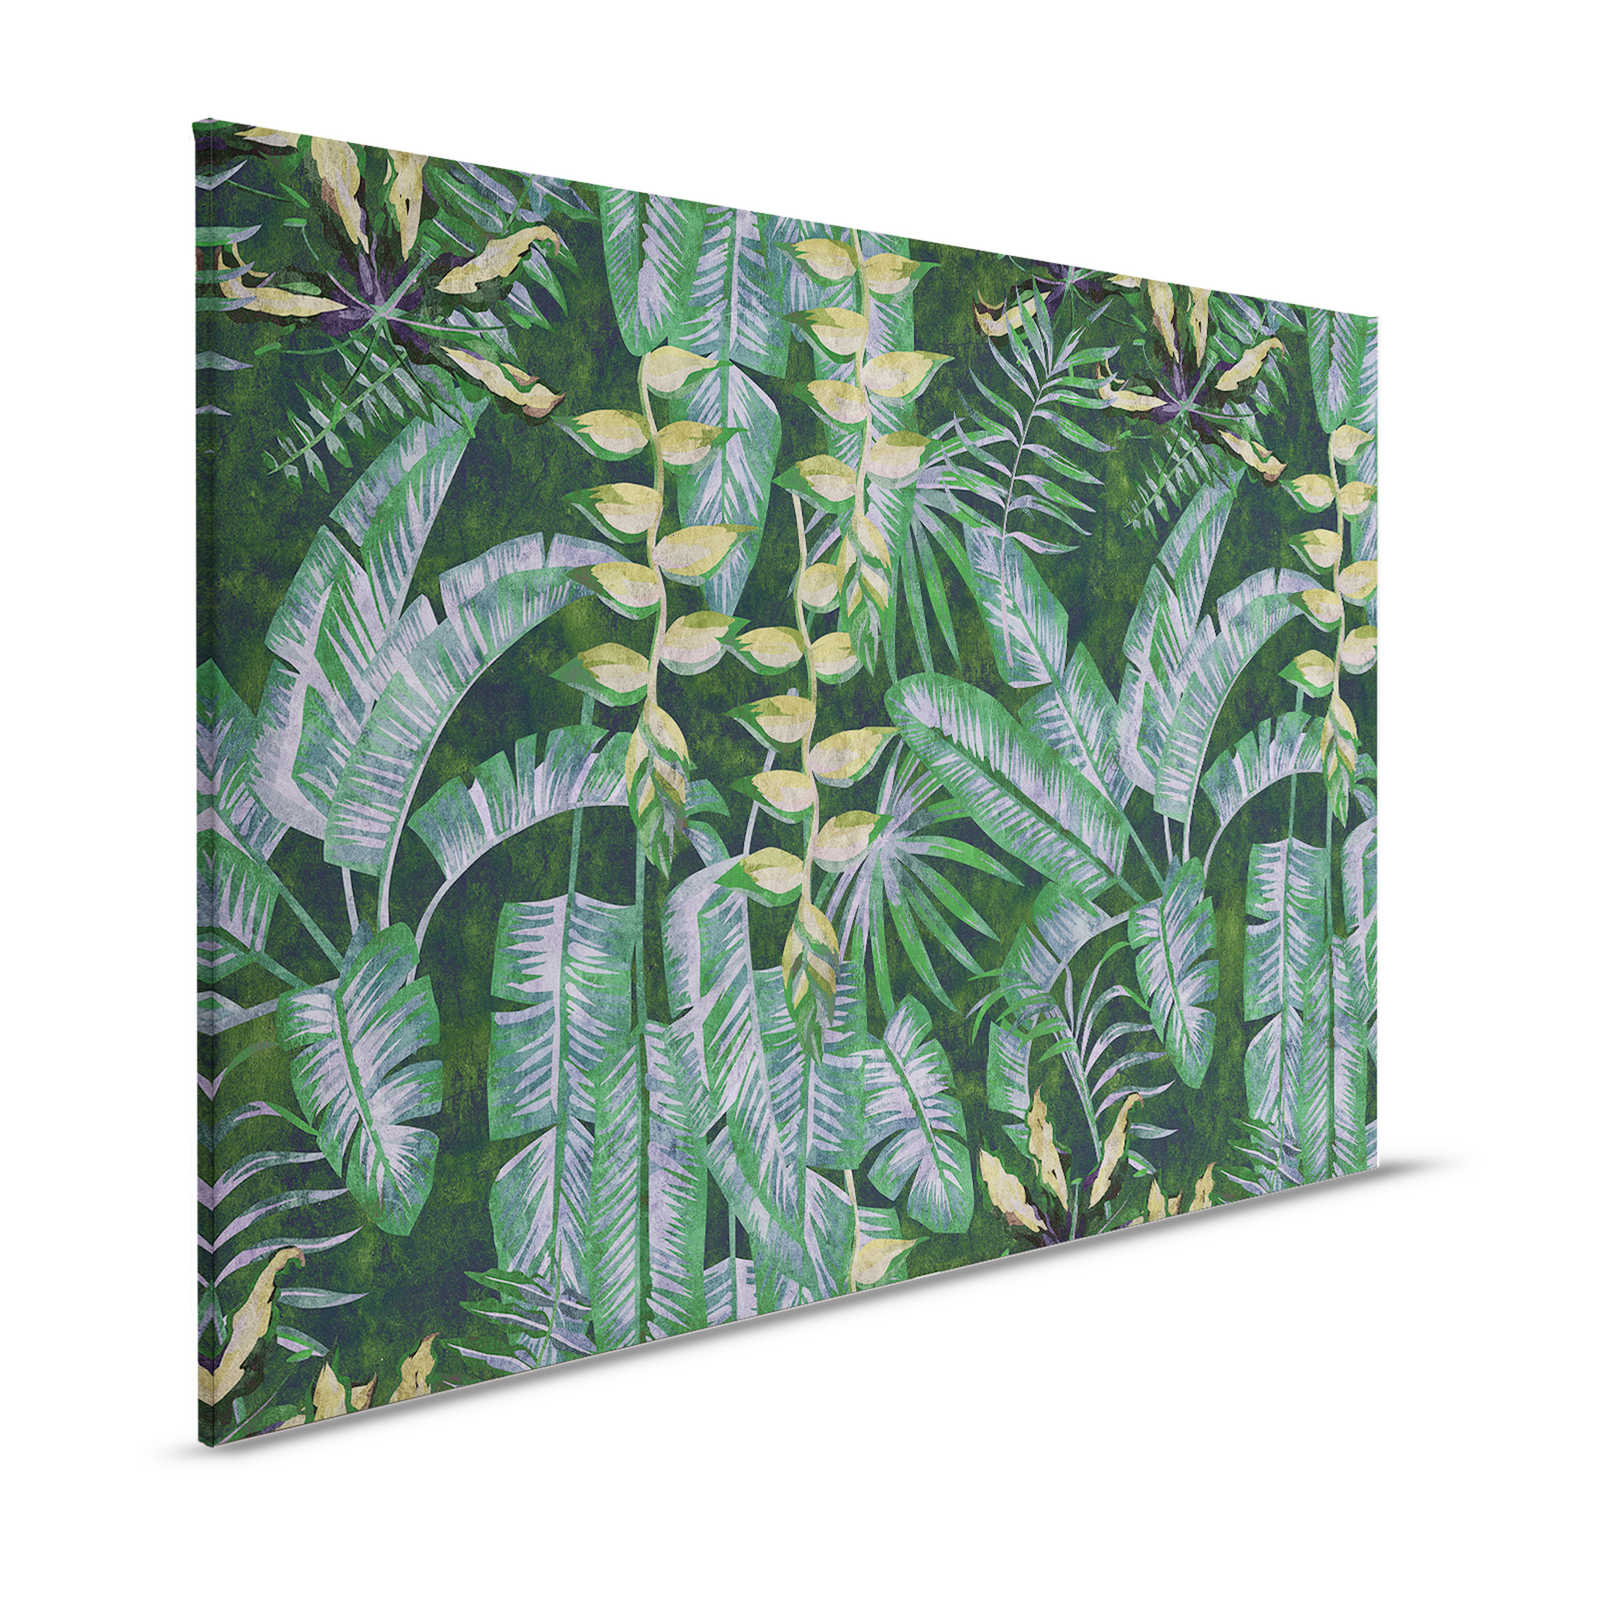 Tropicana 2 - Canvas painting with tropical plants - 1.20 m x 0.80 m
